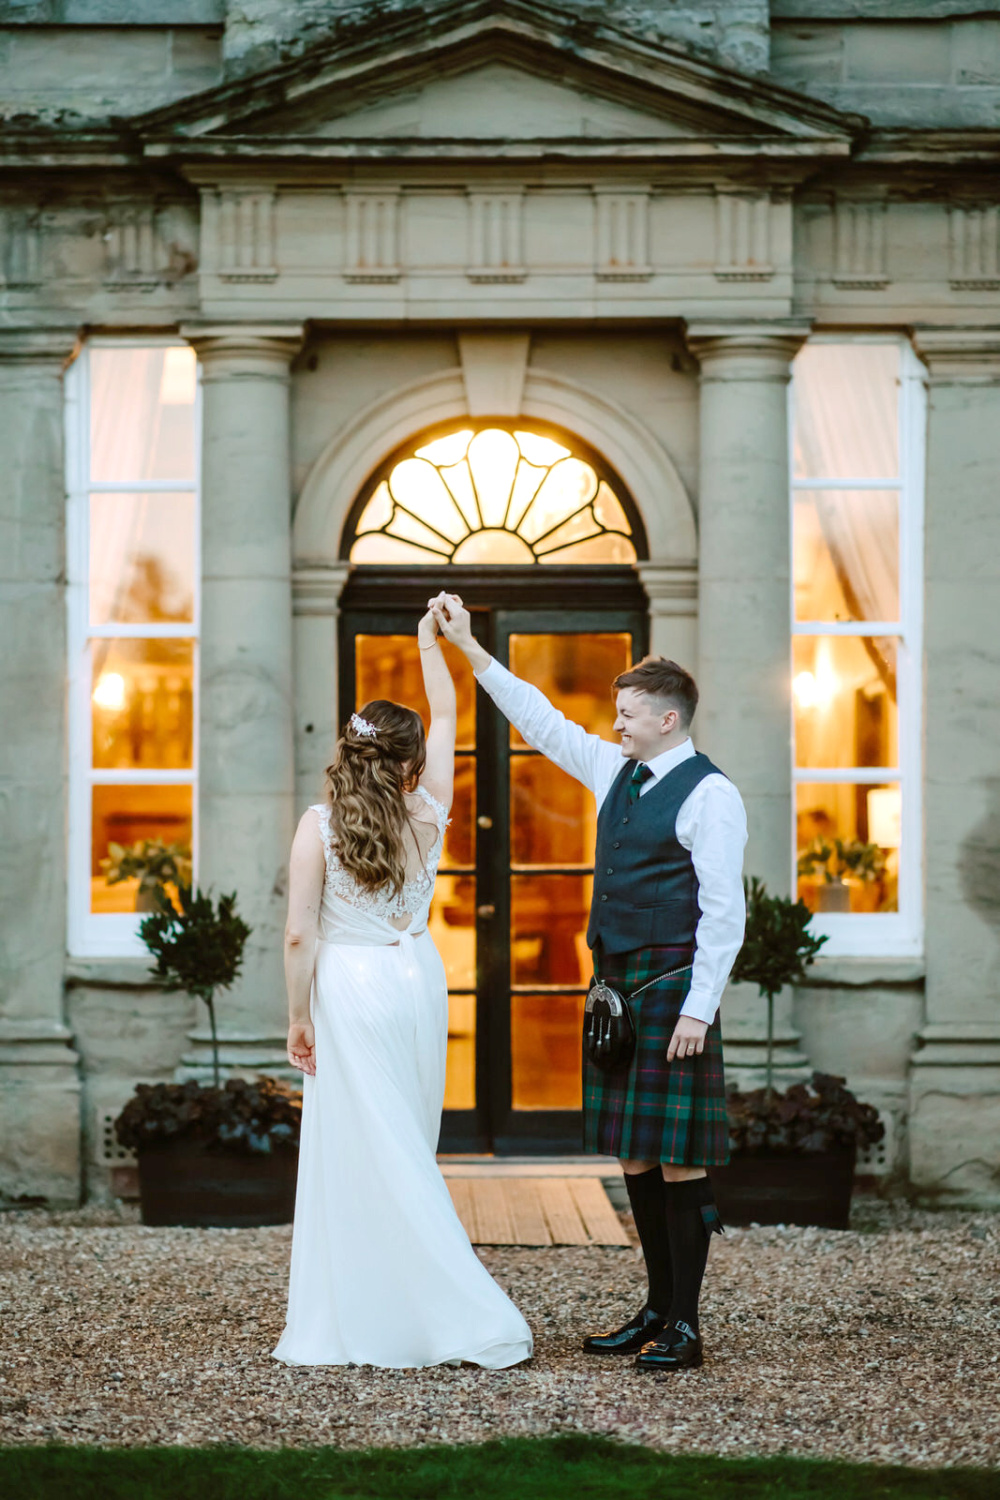 A bride and groom in kilts dancing in front of a Bourton Hall wedding
